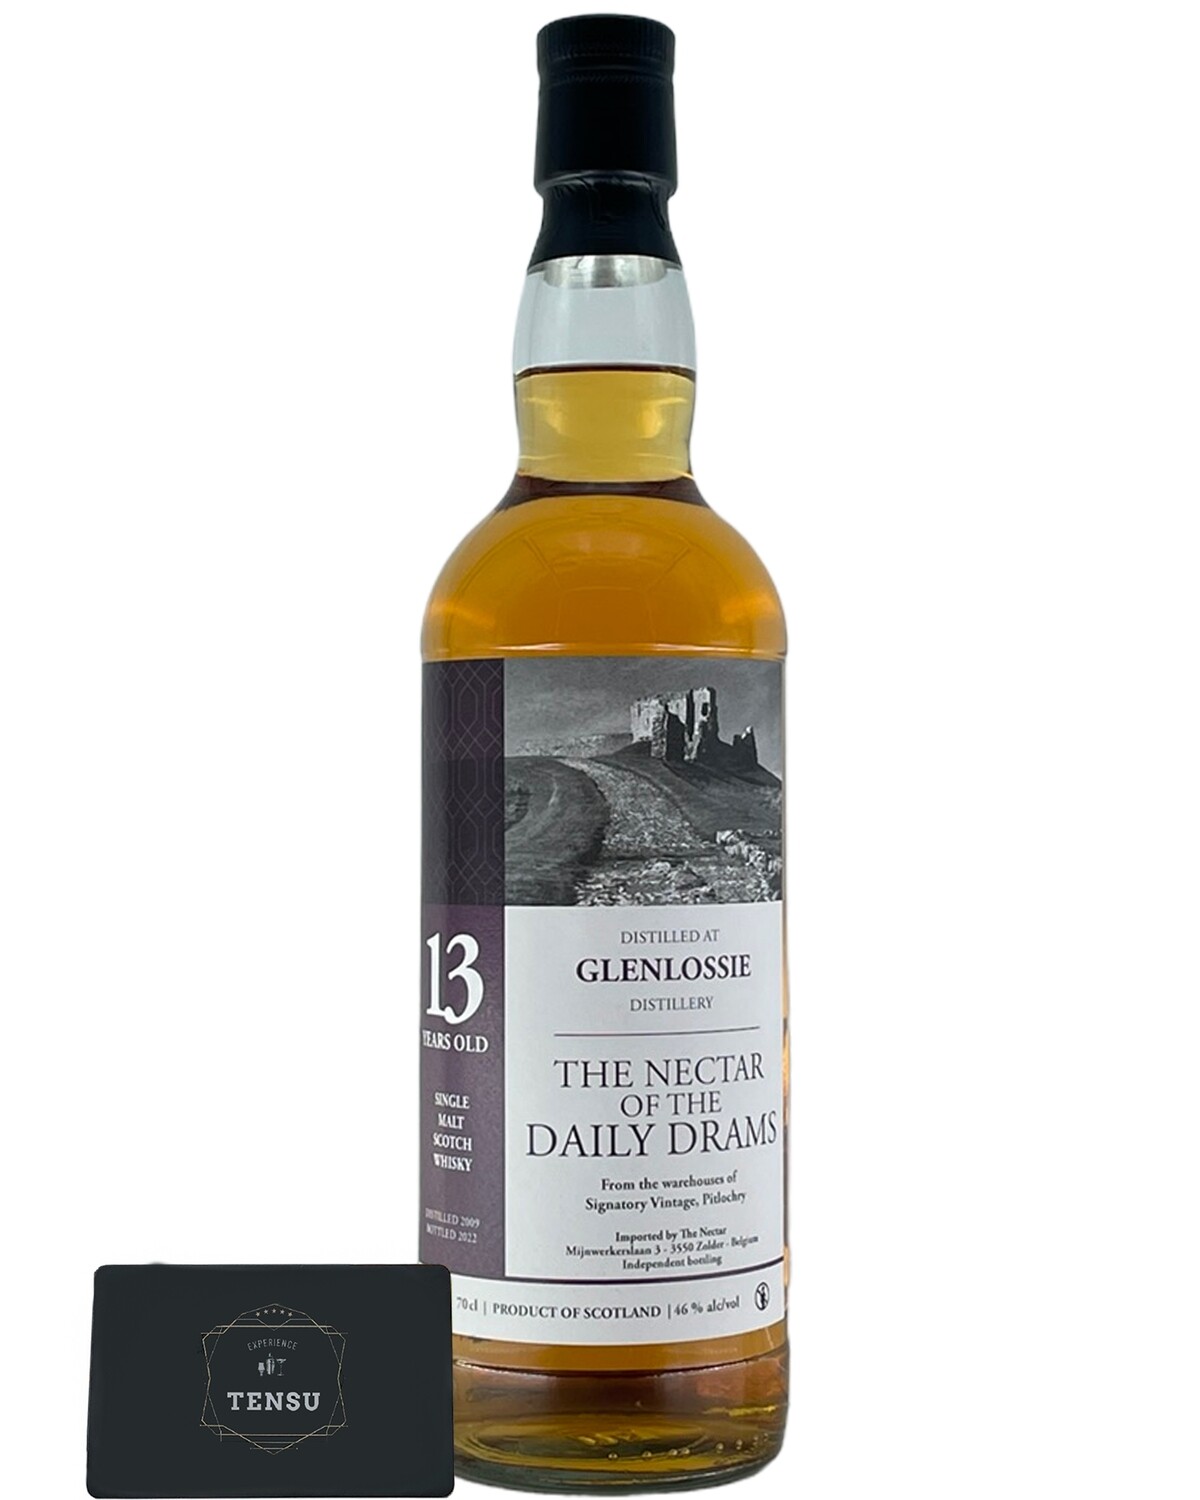 Glenlossie 13 Years Old (2009-2022) 46.0 Daily Drams "The Nectar"